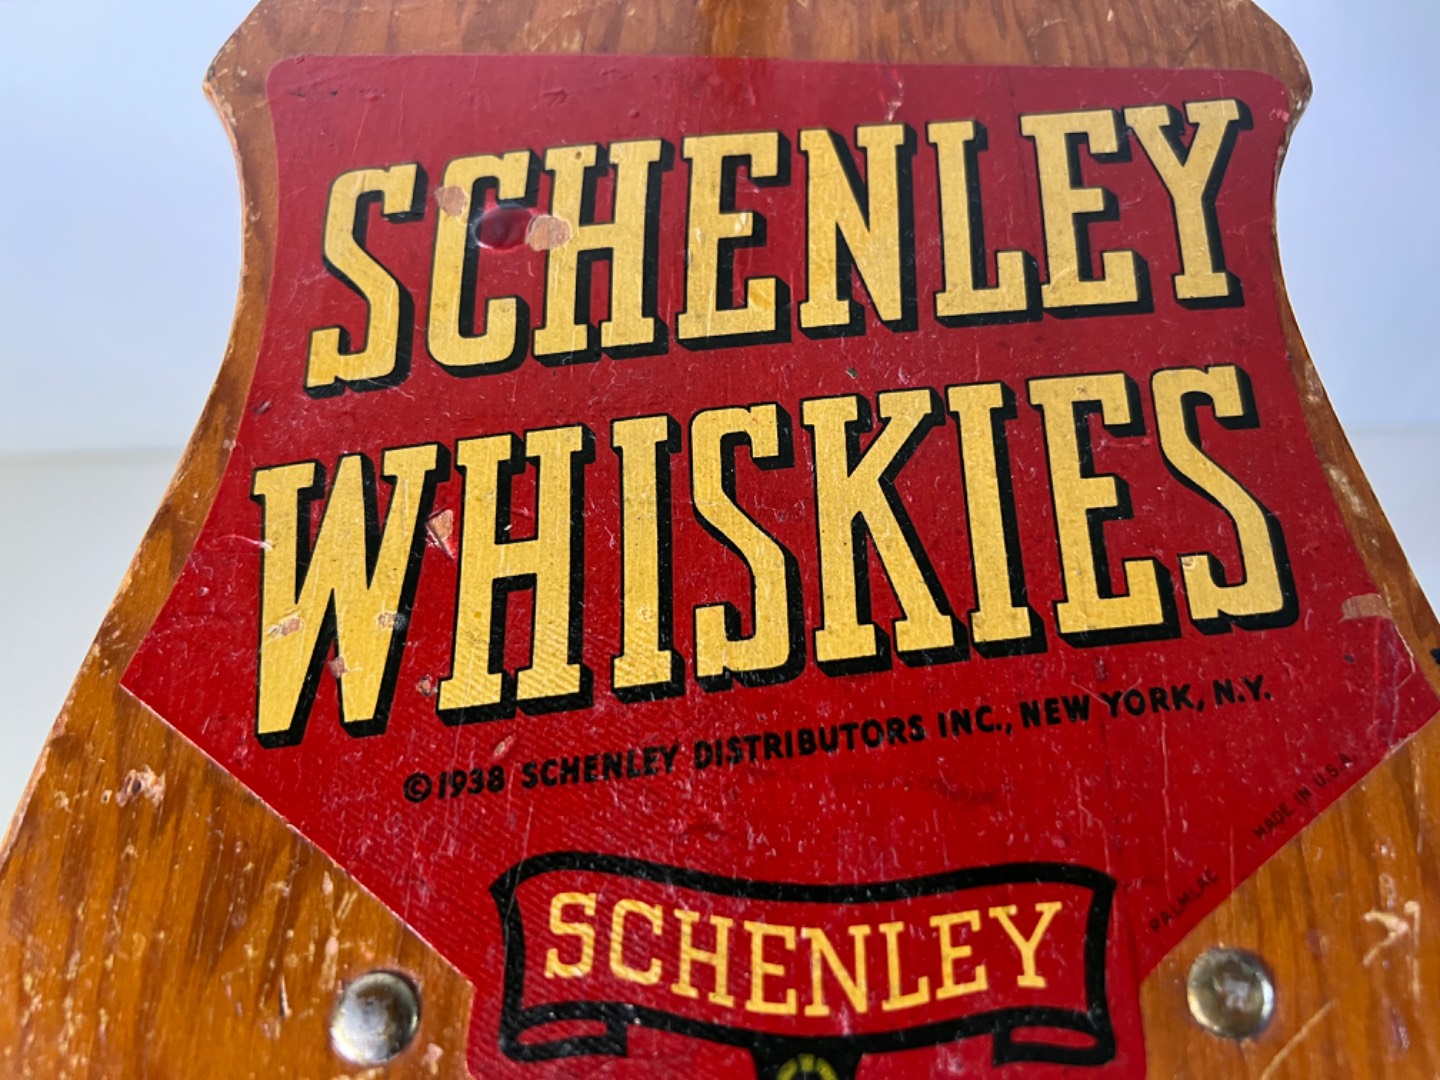 The History of Schenley